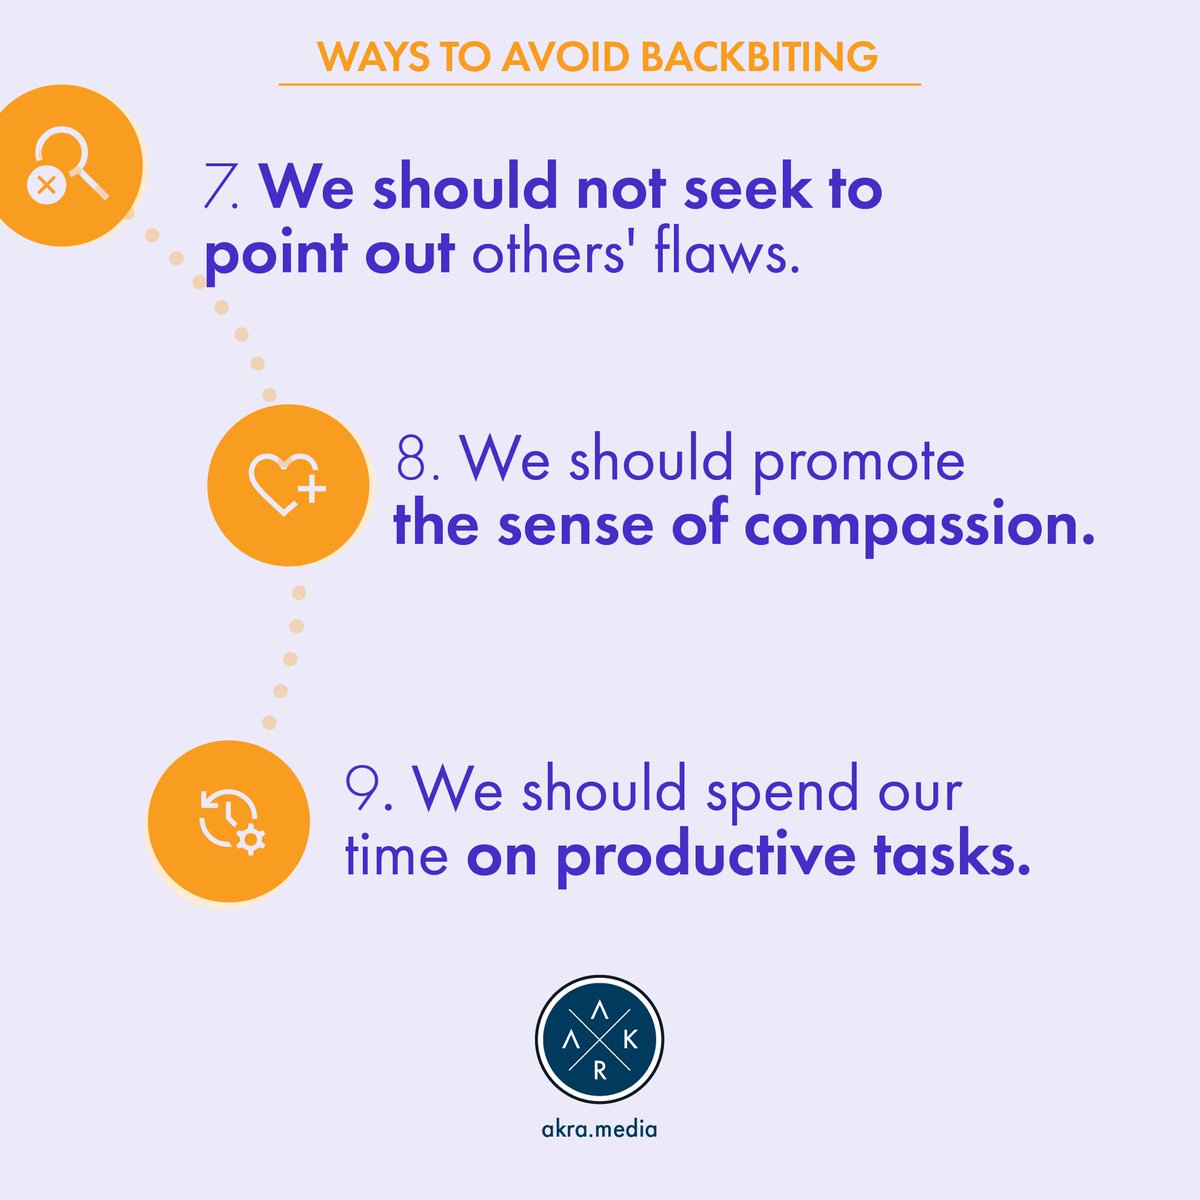 🔹We should not seek to point out others’ flaws.
🔹We should promote the sense of compassion.
🔹We should spend our time on productive tasks.

#backbiting #backbitinginislam #goodness #gooddeeds #kindness #socialwellness #goodvibes #humanity #innerpeace #peace #islam